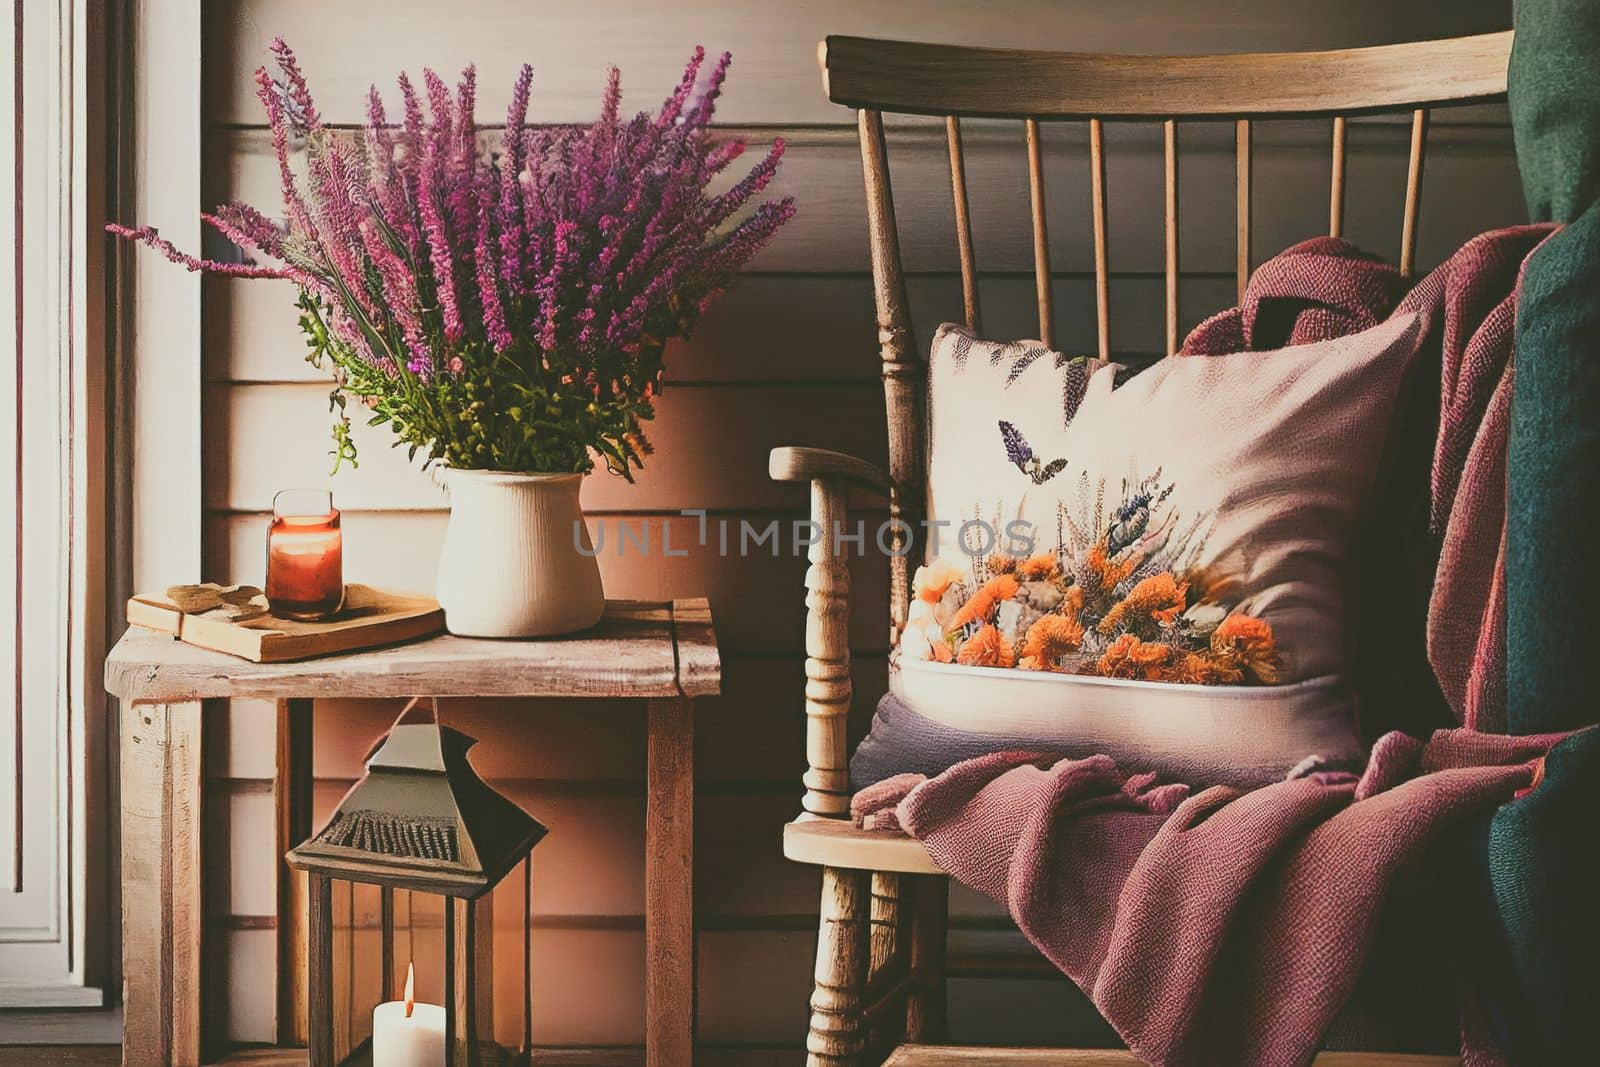 Cozy winter morning at home with hot coffee, warm blanket, candle lights, heather lavender flowers by FokasuArt